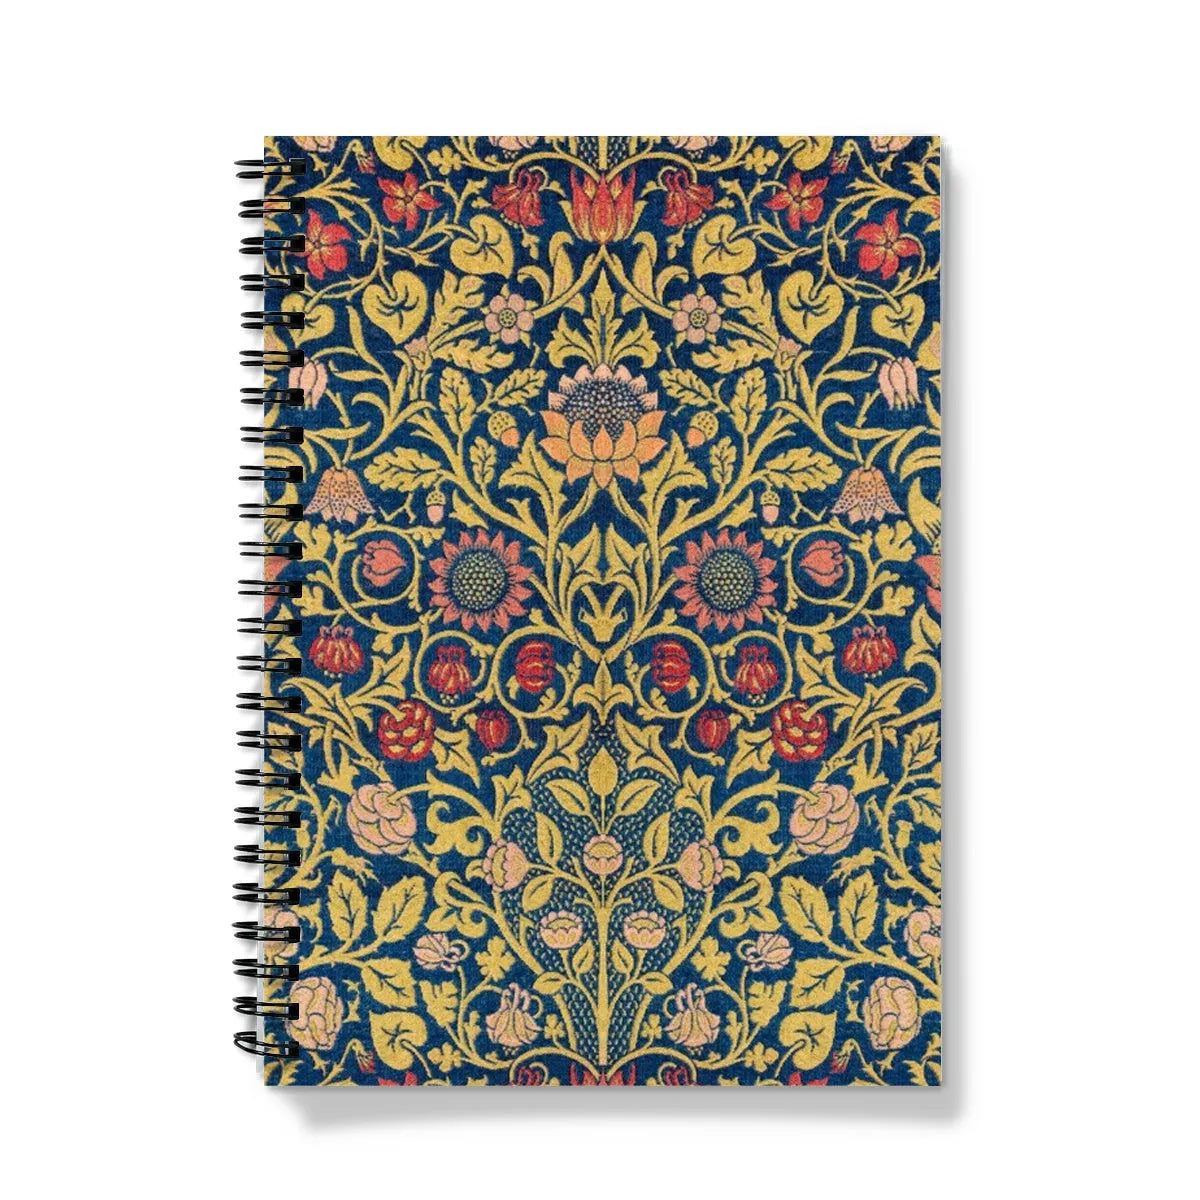 Violet And Columbine - William Morris Notebook - A5 / Graph - Notebooks & Notepads - Aesthetic Art